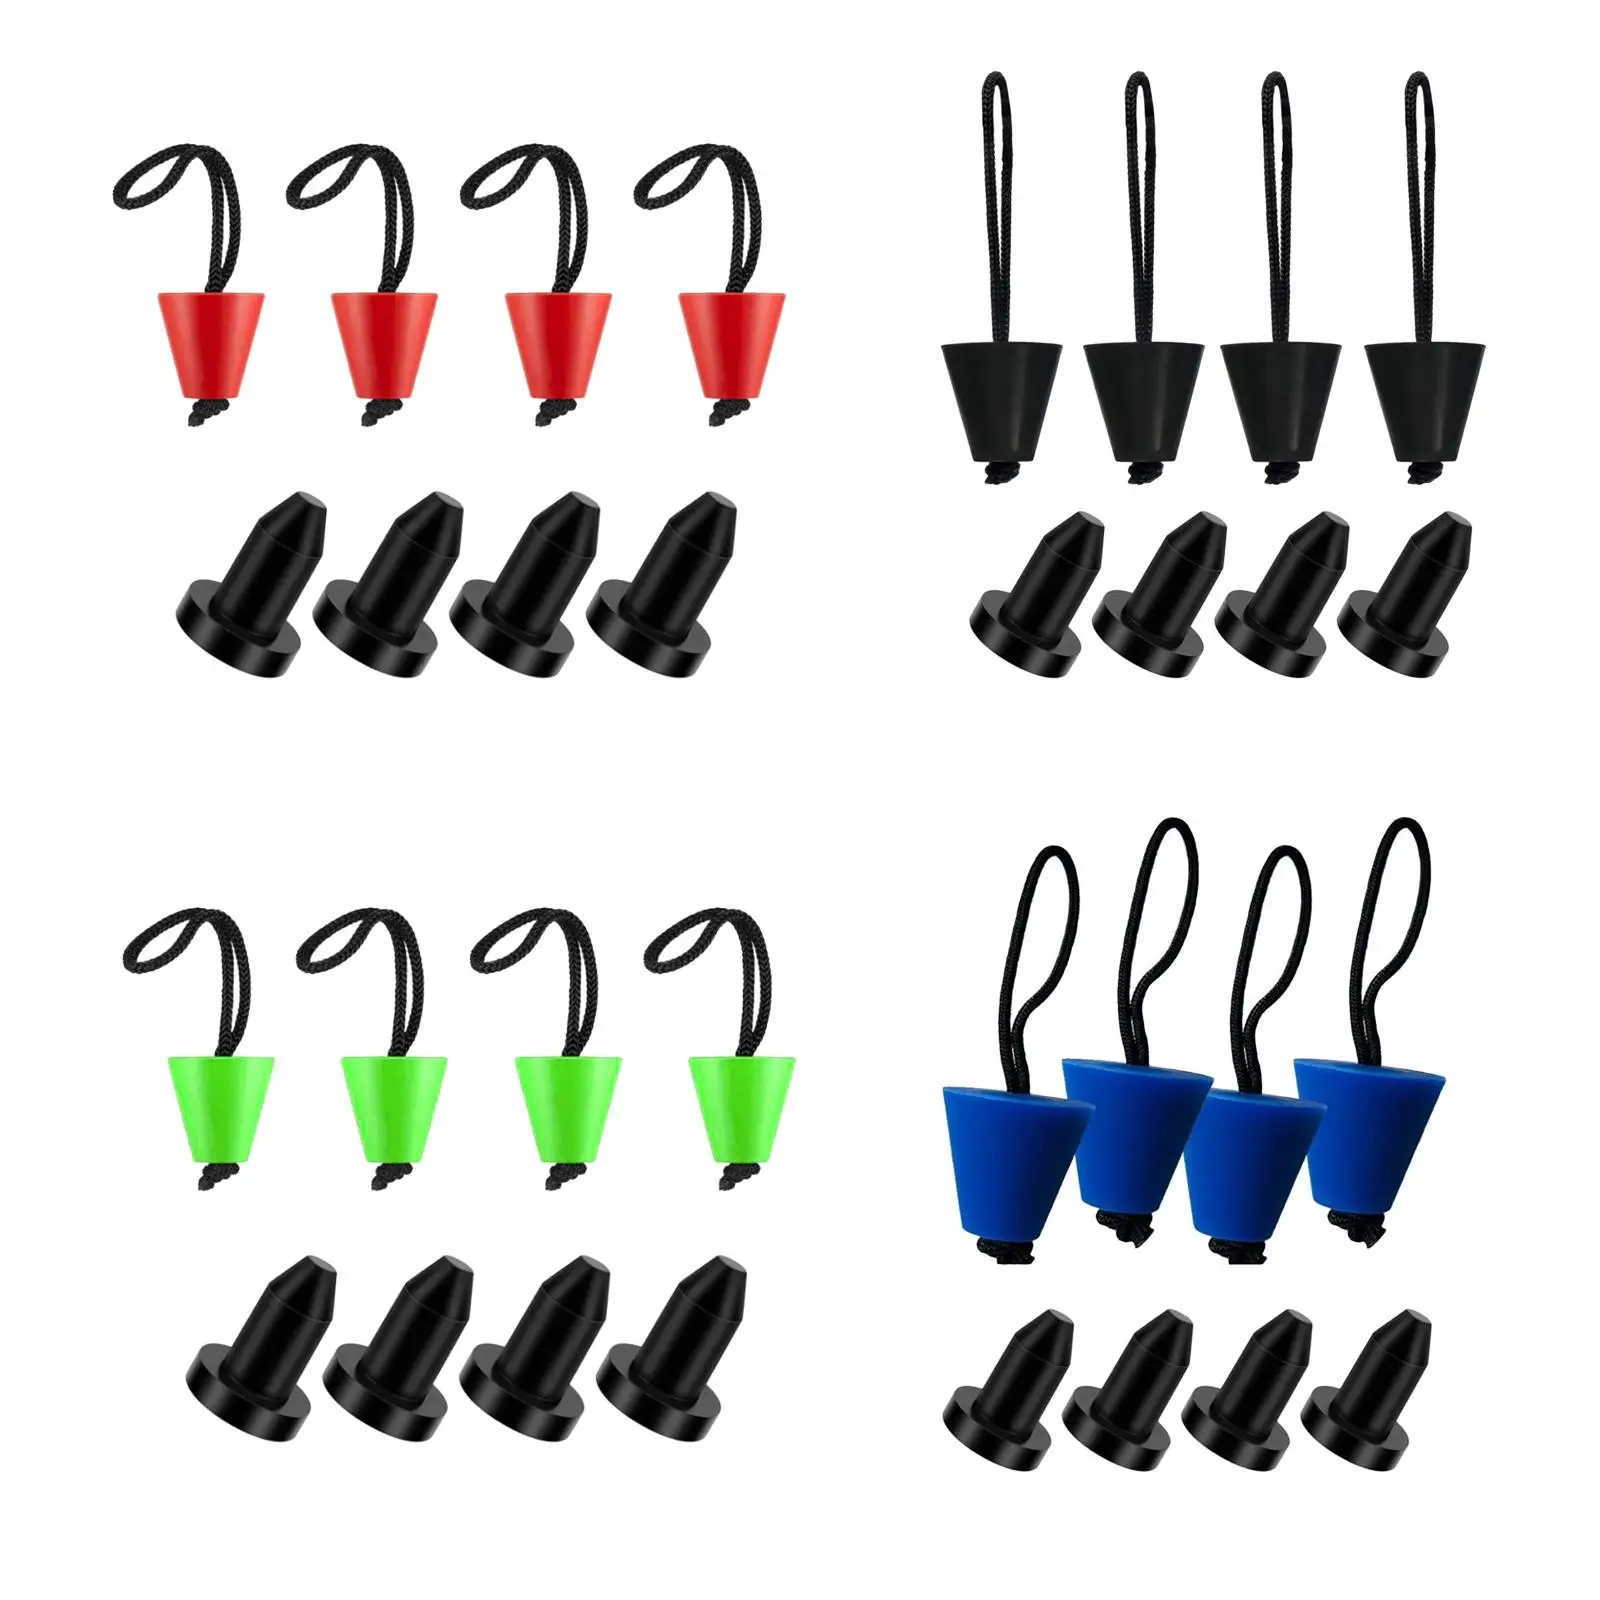 8x Kayak Scupper Plugs Replaces Part Accessories Supplies Kayak Drain Plug for Yacht Canoe Fishing Boats Kayak Water Sports